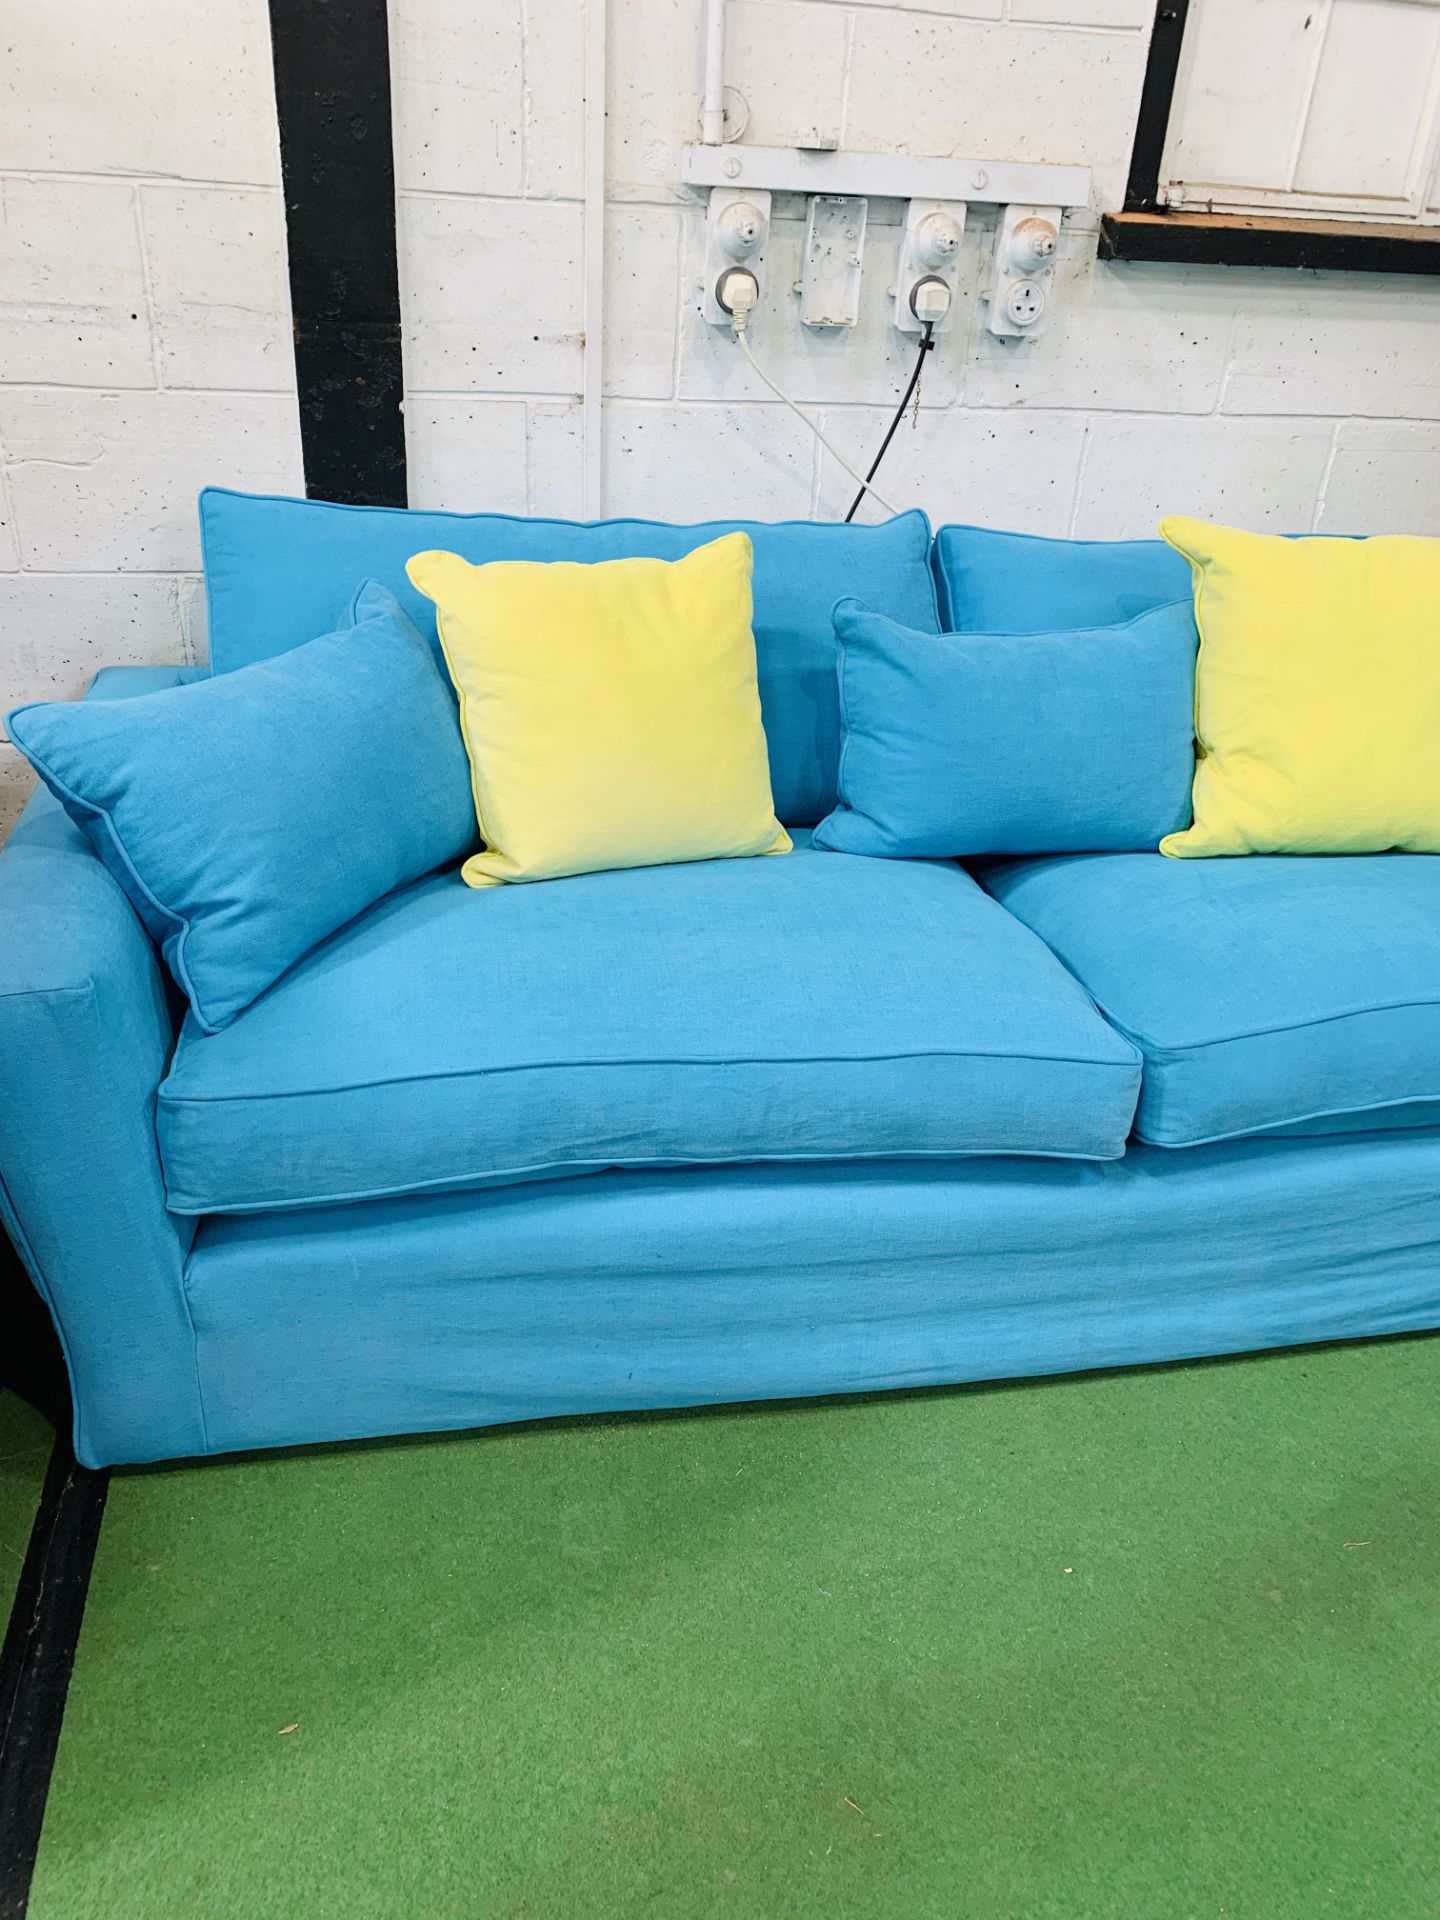 Three seat sofa by "Sofa Workshop" upholstered in turquoise cotton loose covers, with matching cushi - Image 2 of 4